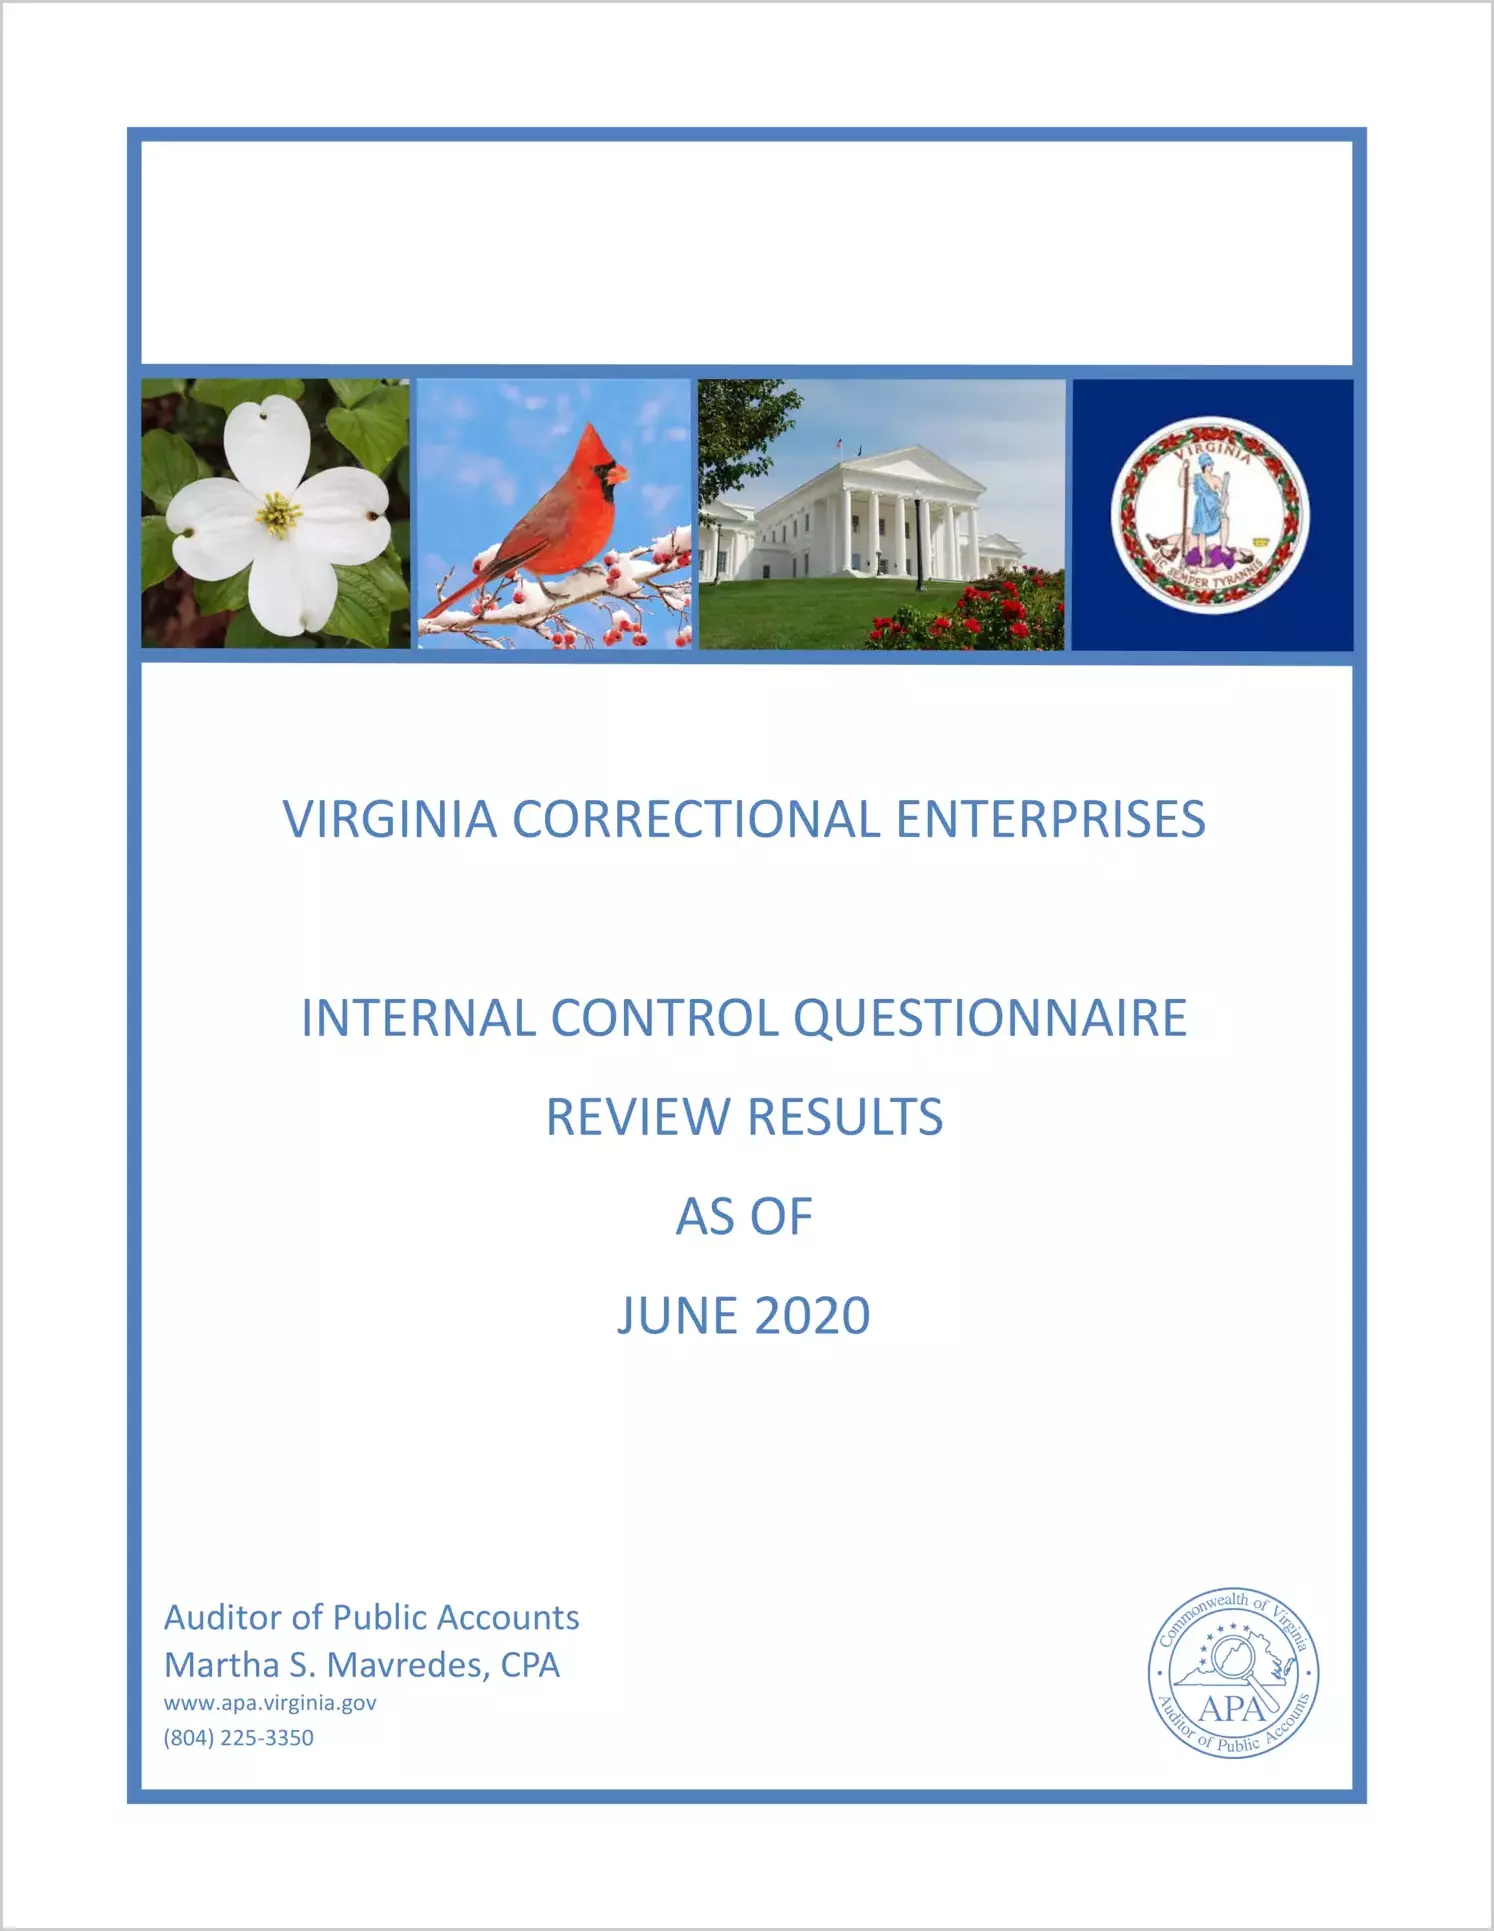 Virginia Correctional Enterprises Internal Control Questionnaire Review Results as of June 2020